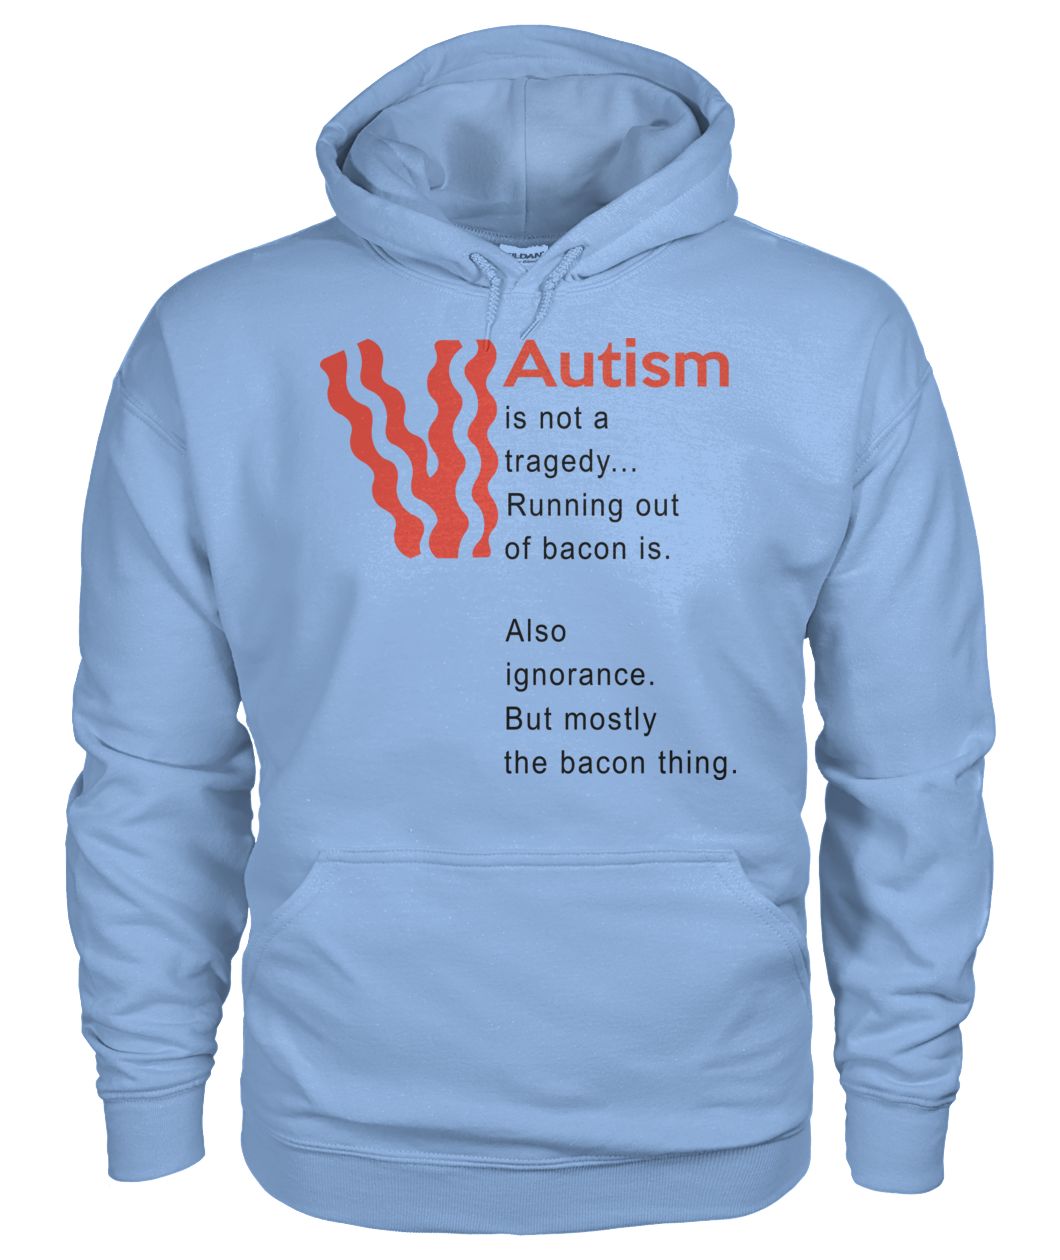 Autism is not a tragedy running out of bacon is gildan hoodie